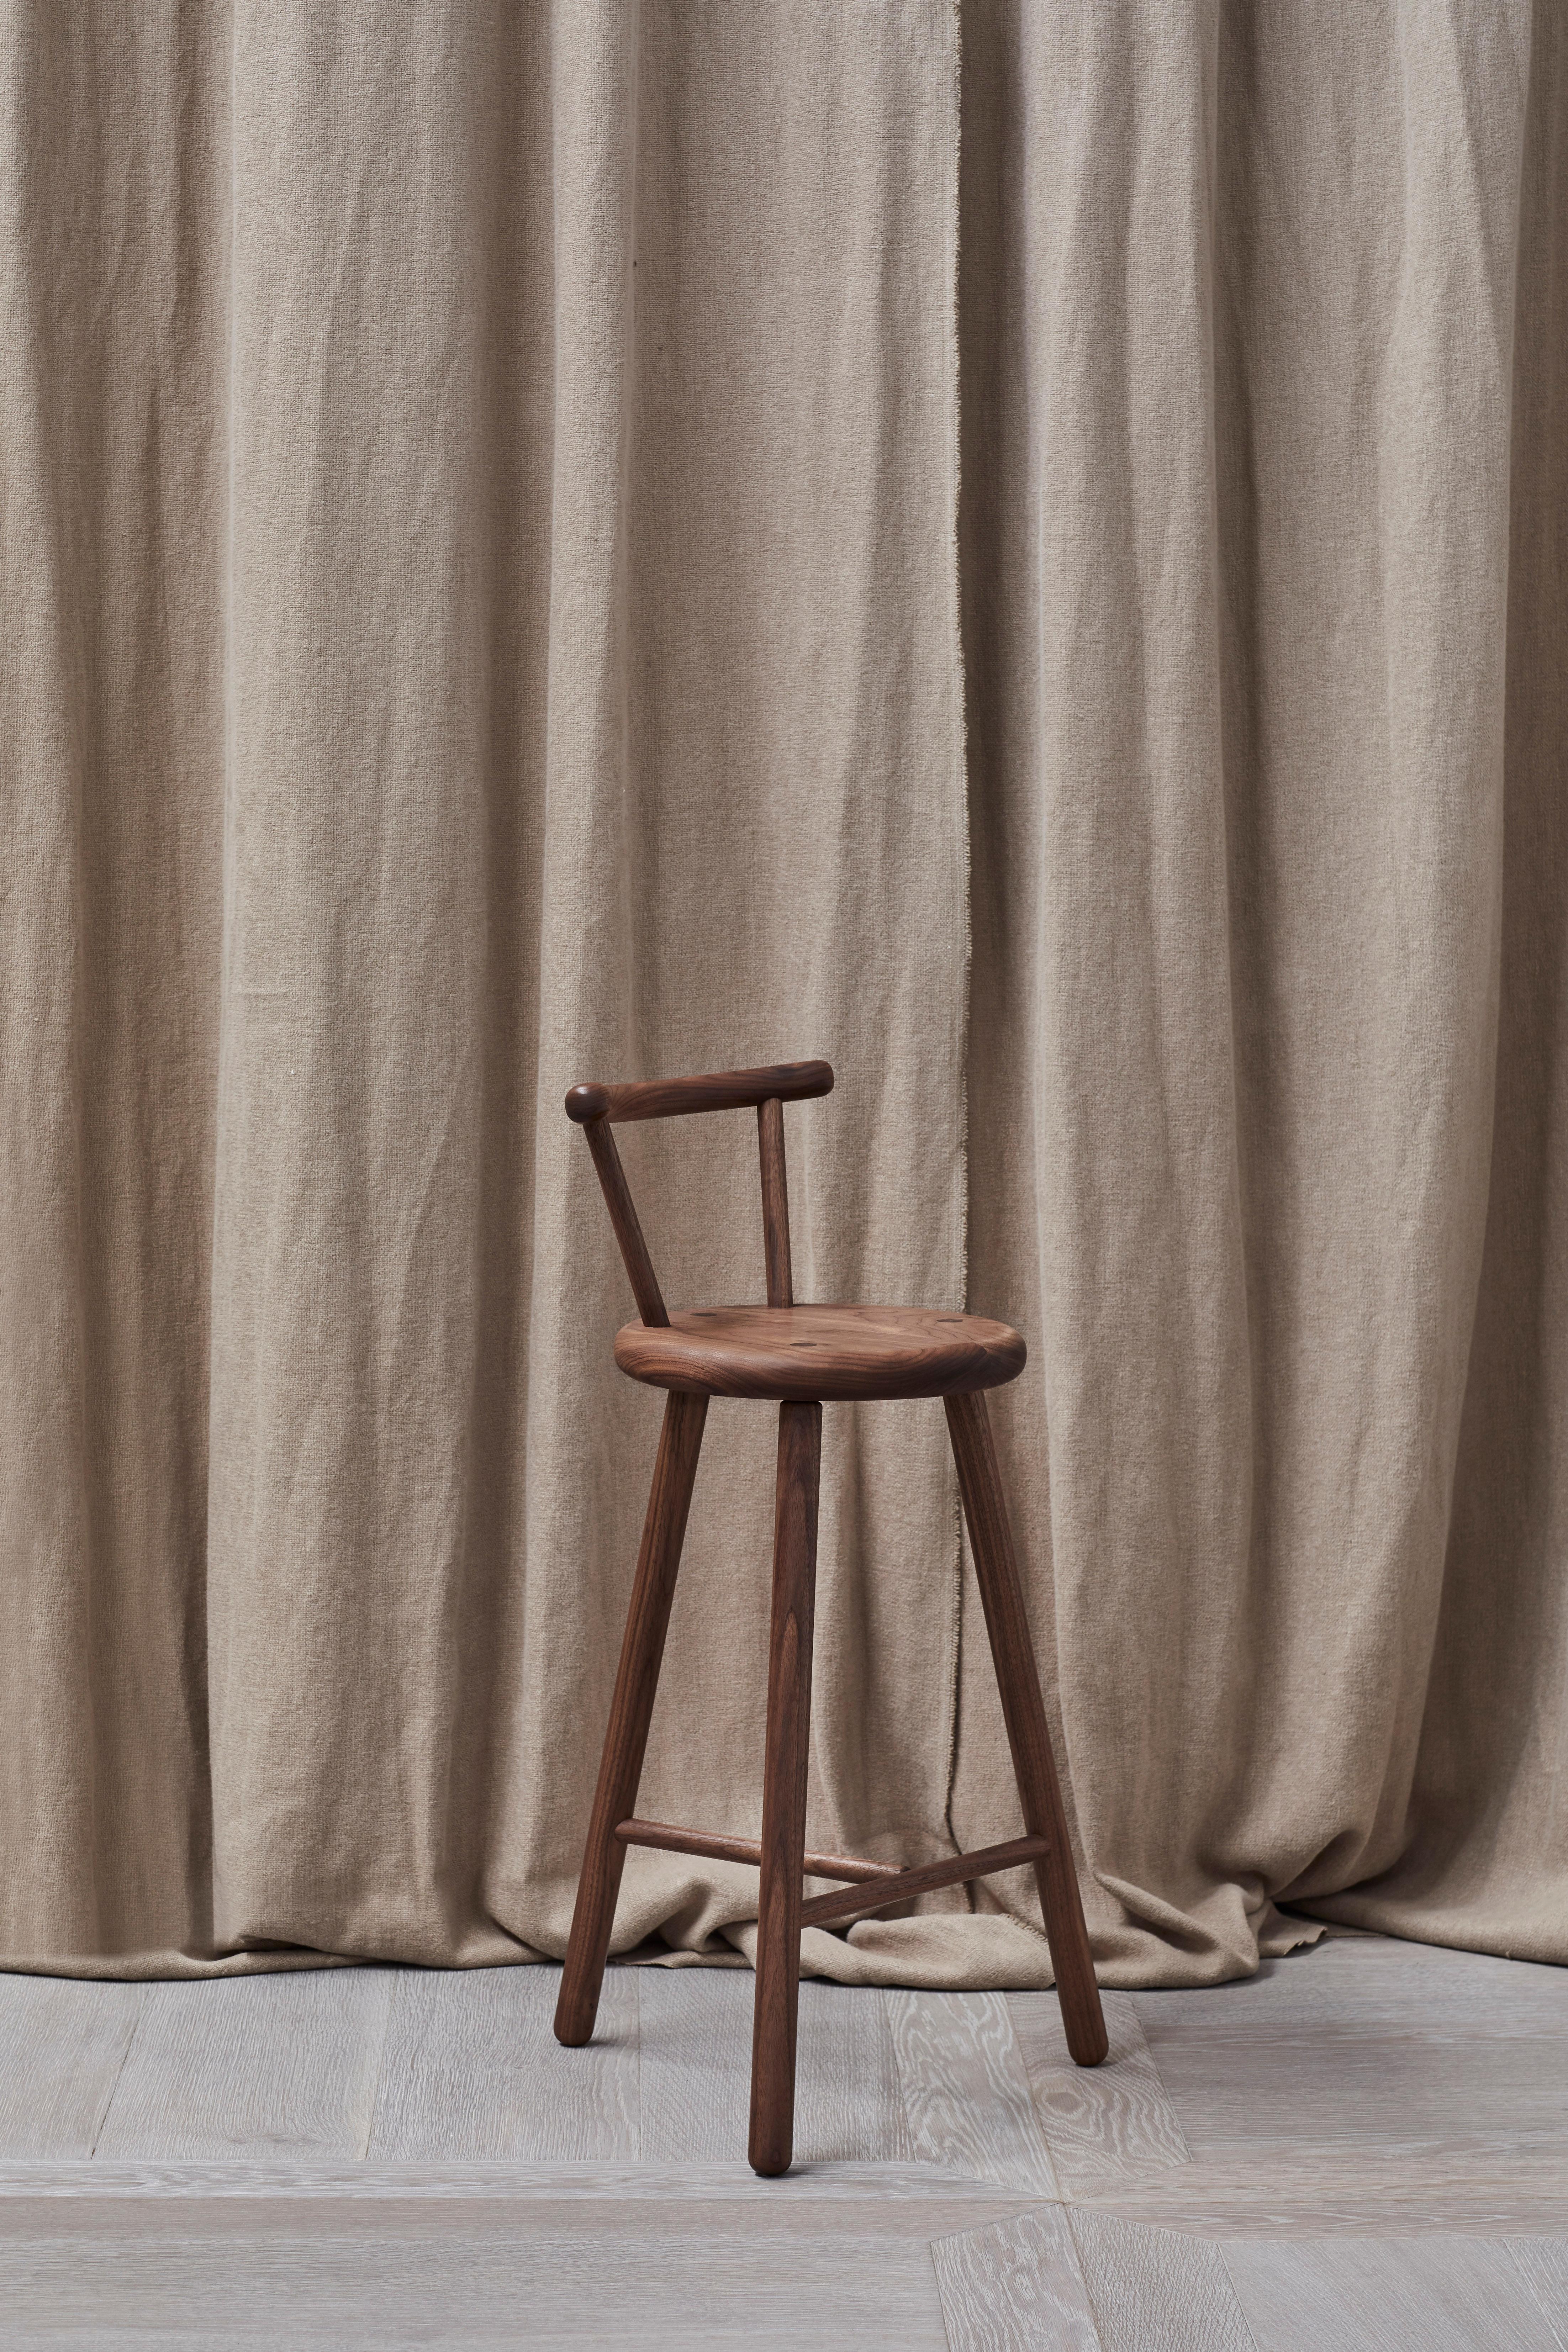 The low back barstool is an elegant and beautifully handcrafted barstool made from the finest hardwoods.
Handturned on a lathe and made with real split tenon joinery the low back barstool is a simple and Classic design that can compliment a wide